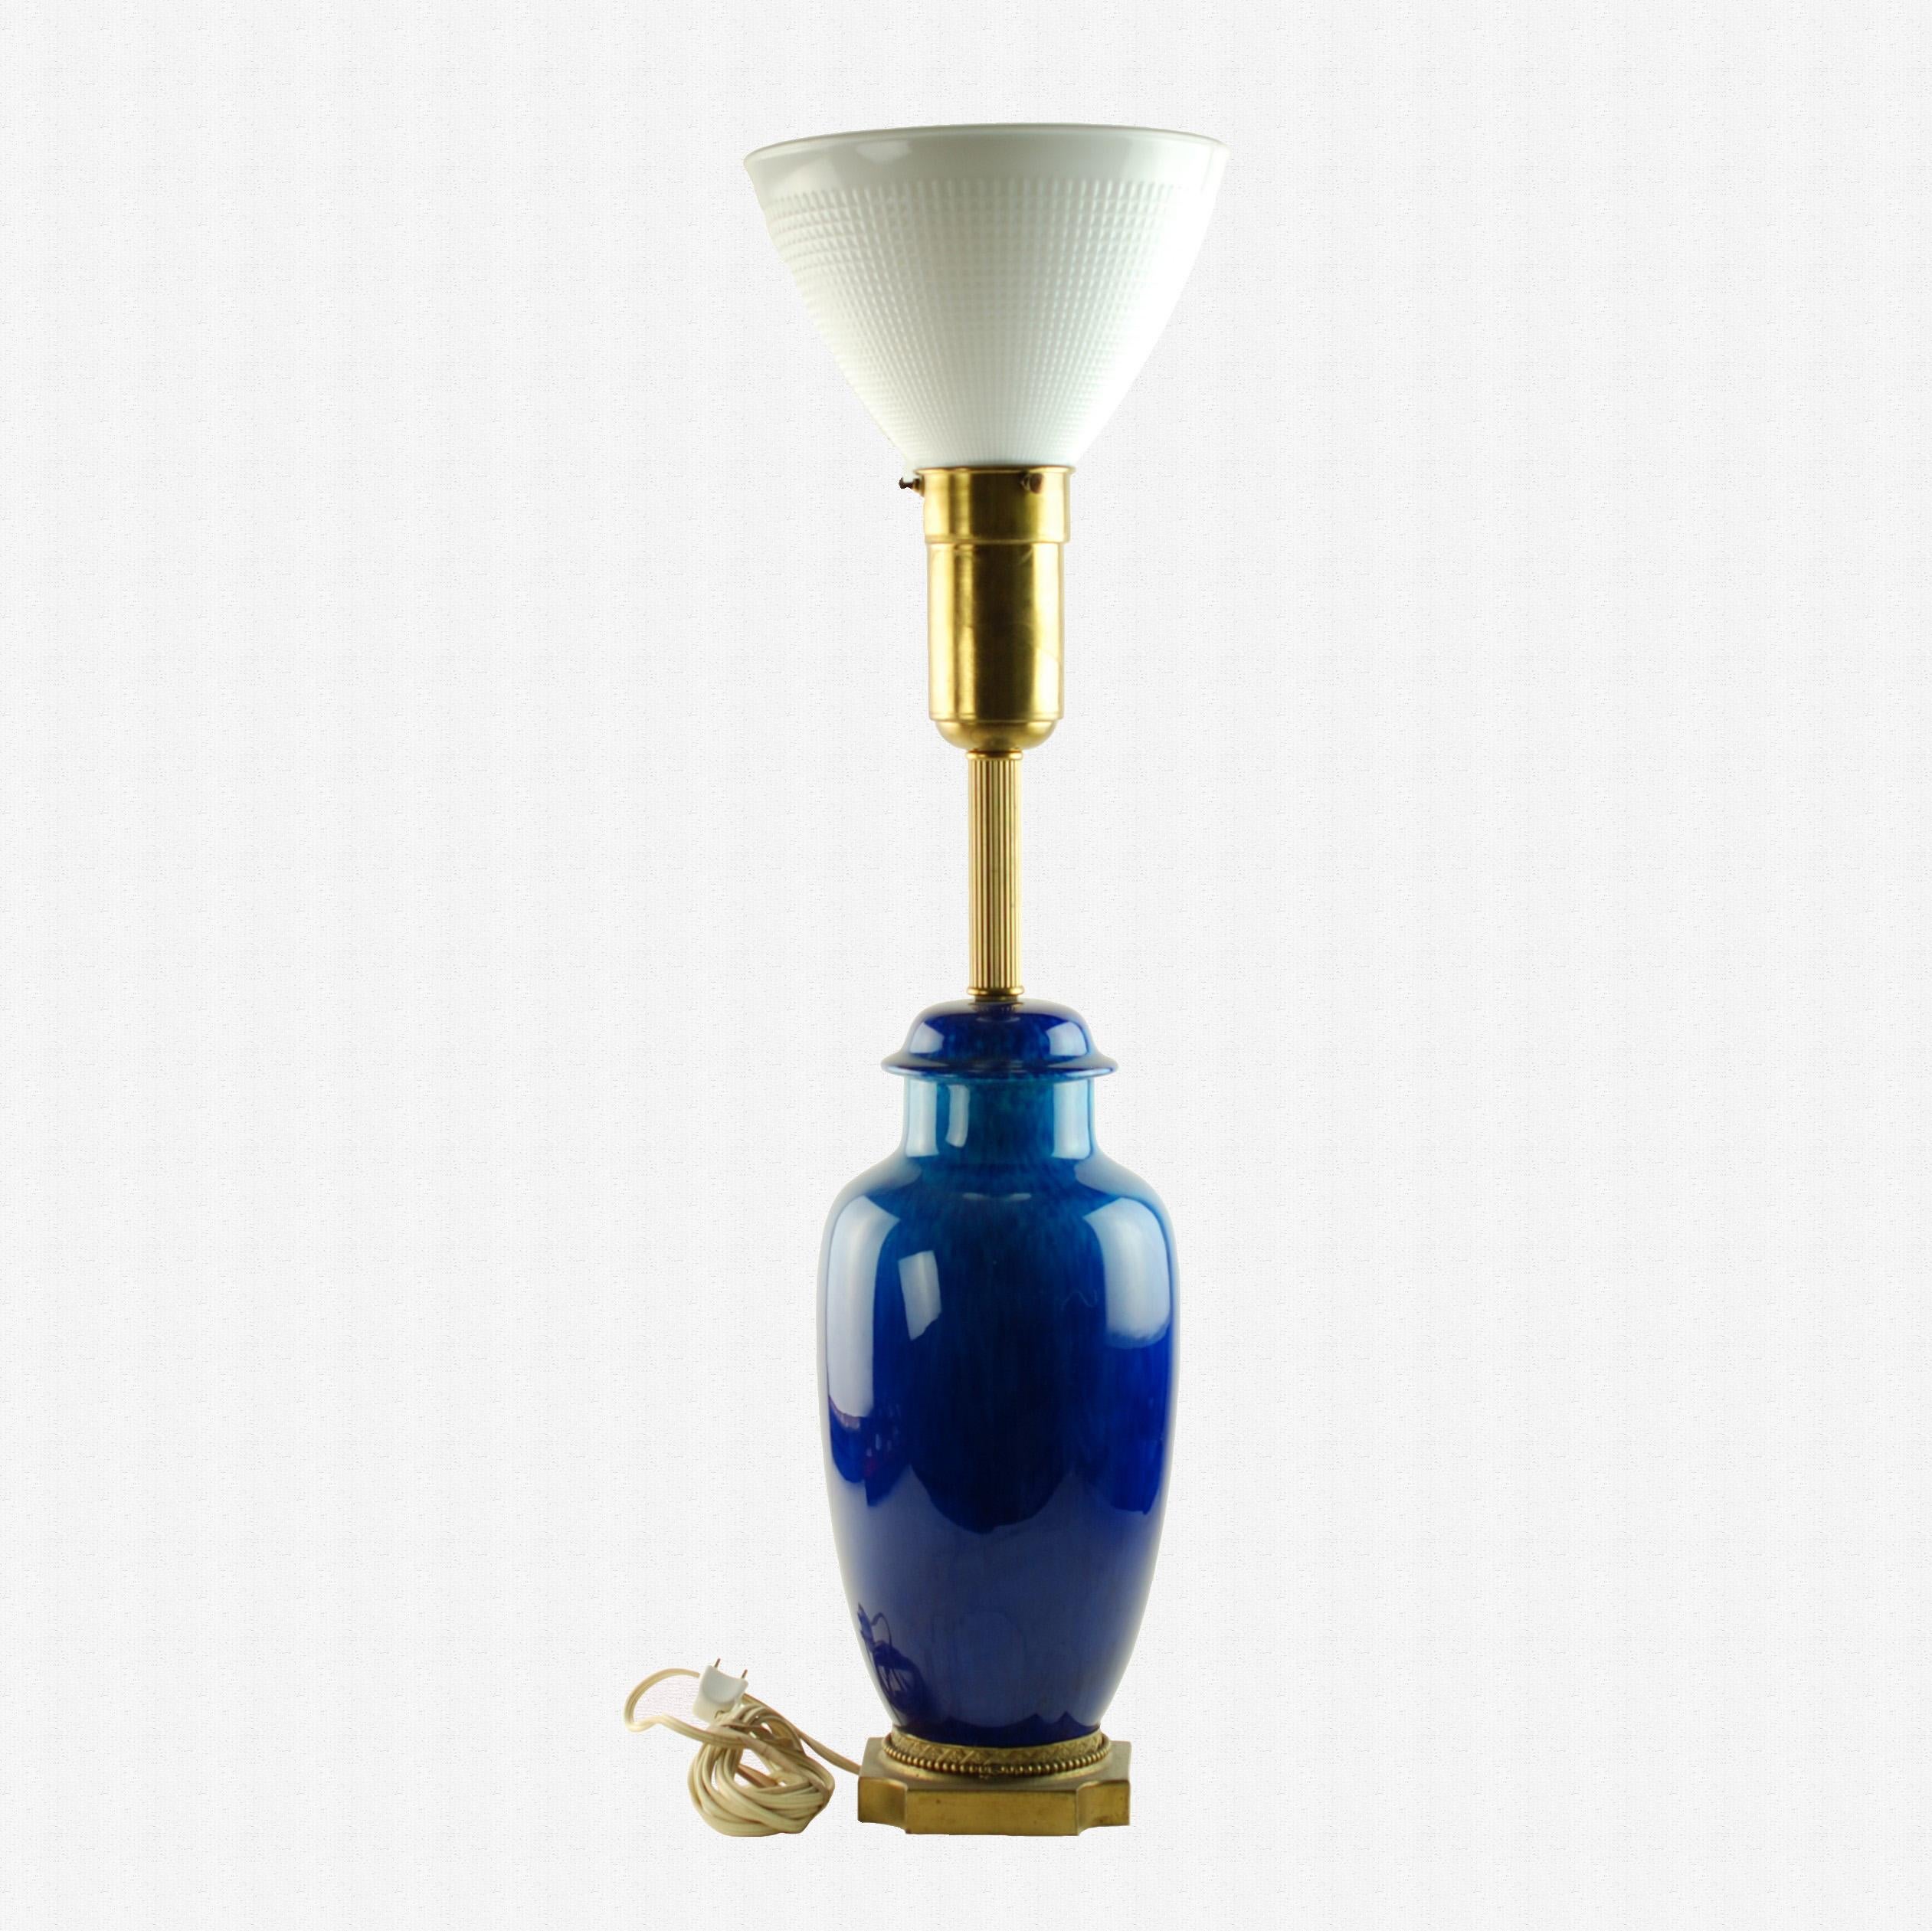 This Art Deco era porcelain torchiere table lamp was designed by Paul Milet (1870-1950) for Sèvres and comes complete with its original glass diffuser shade. The body of the lamp has been finished in a rich azure/sapphire jewel-toned glaze and is